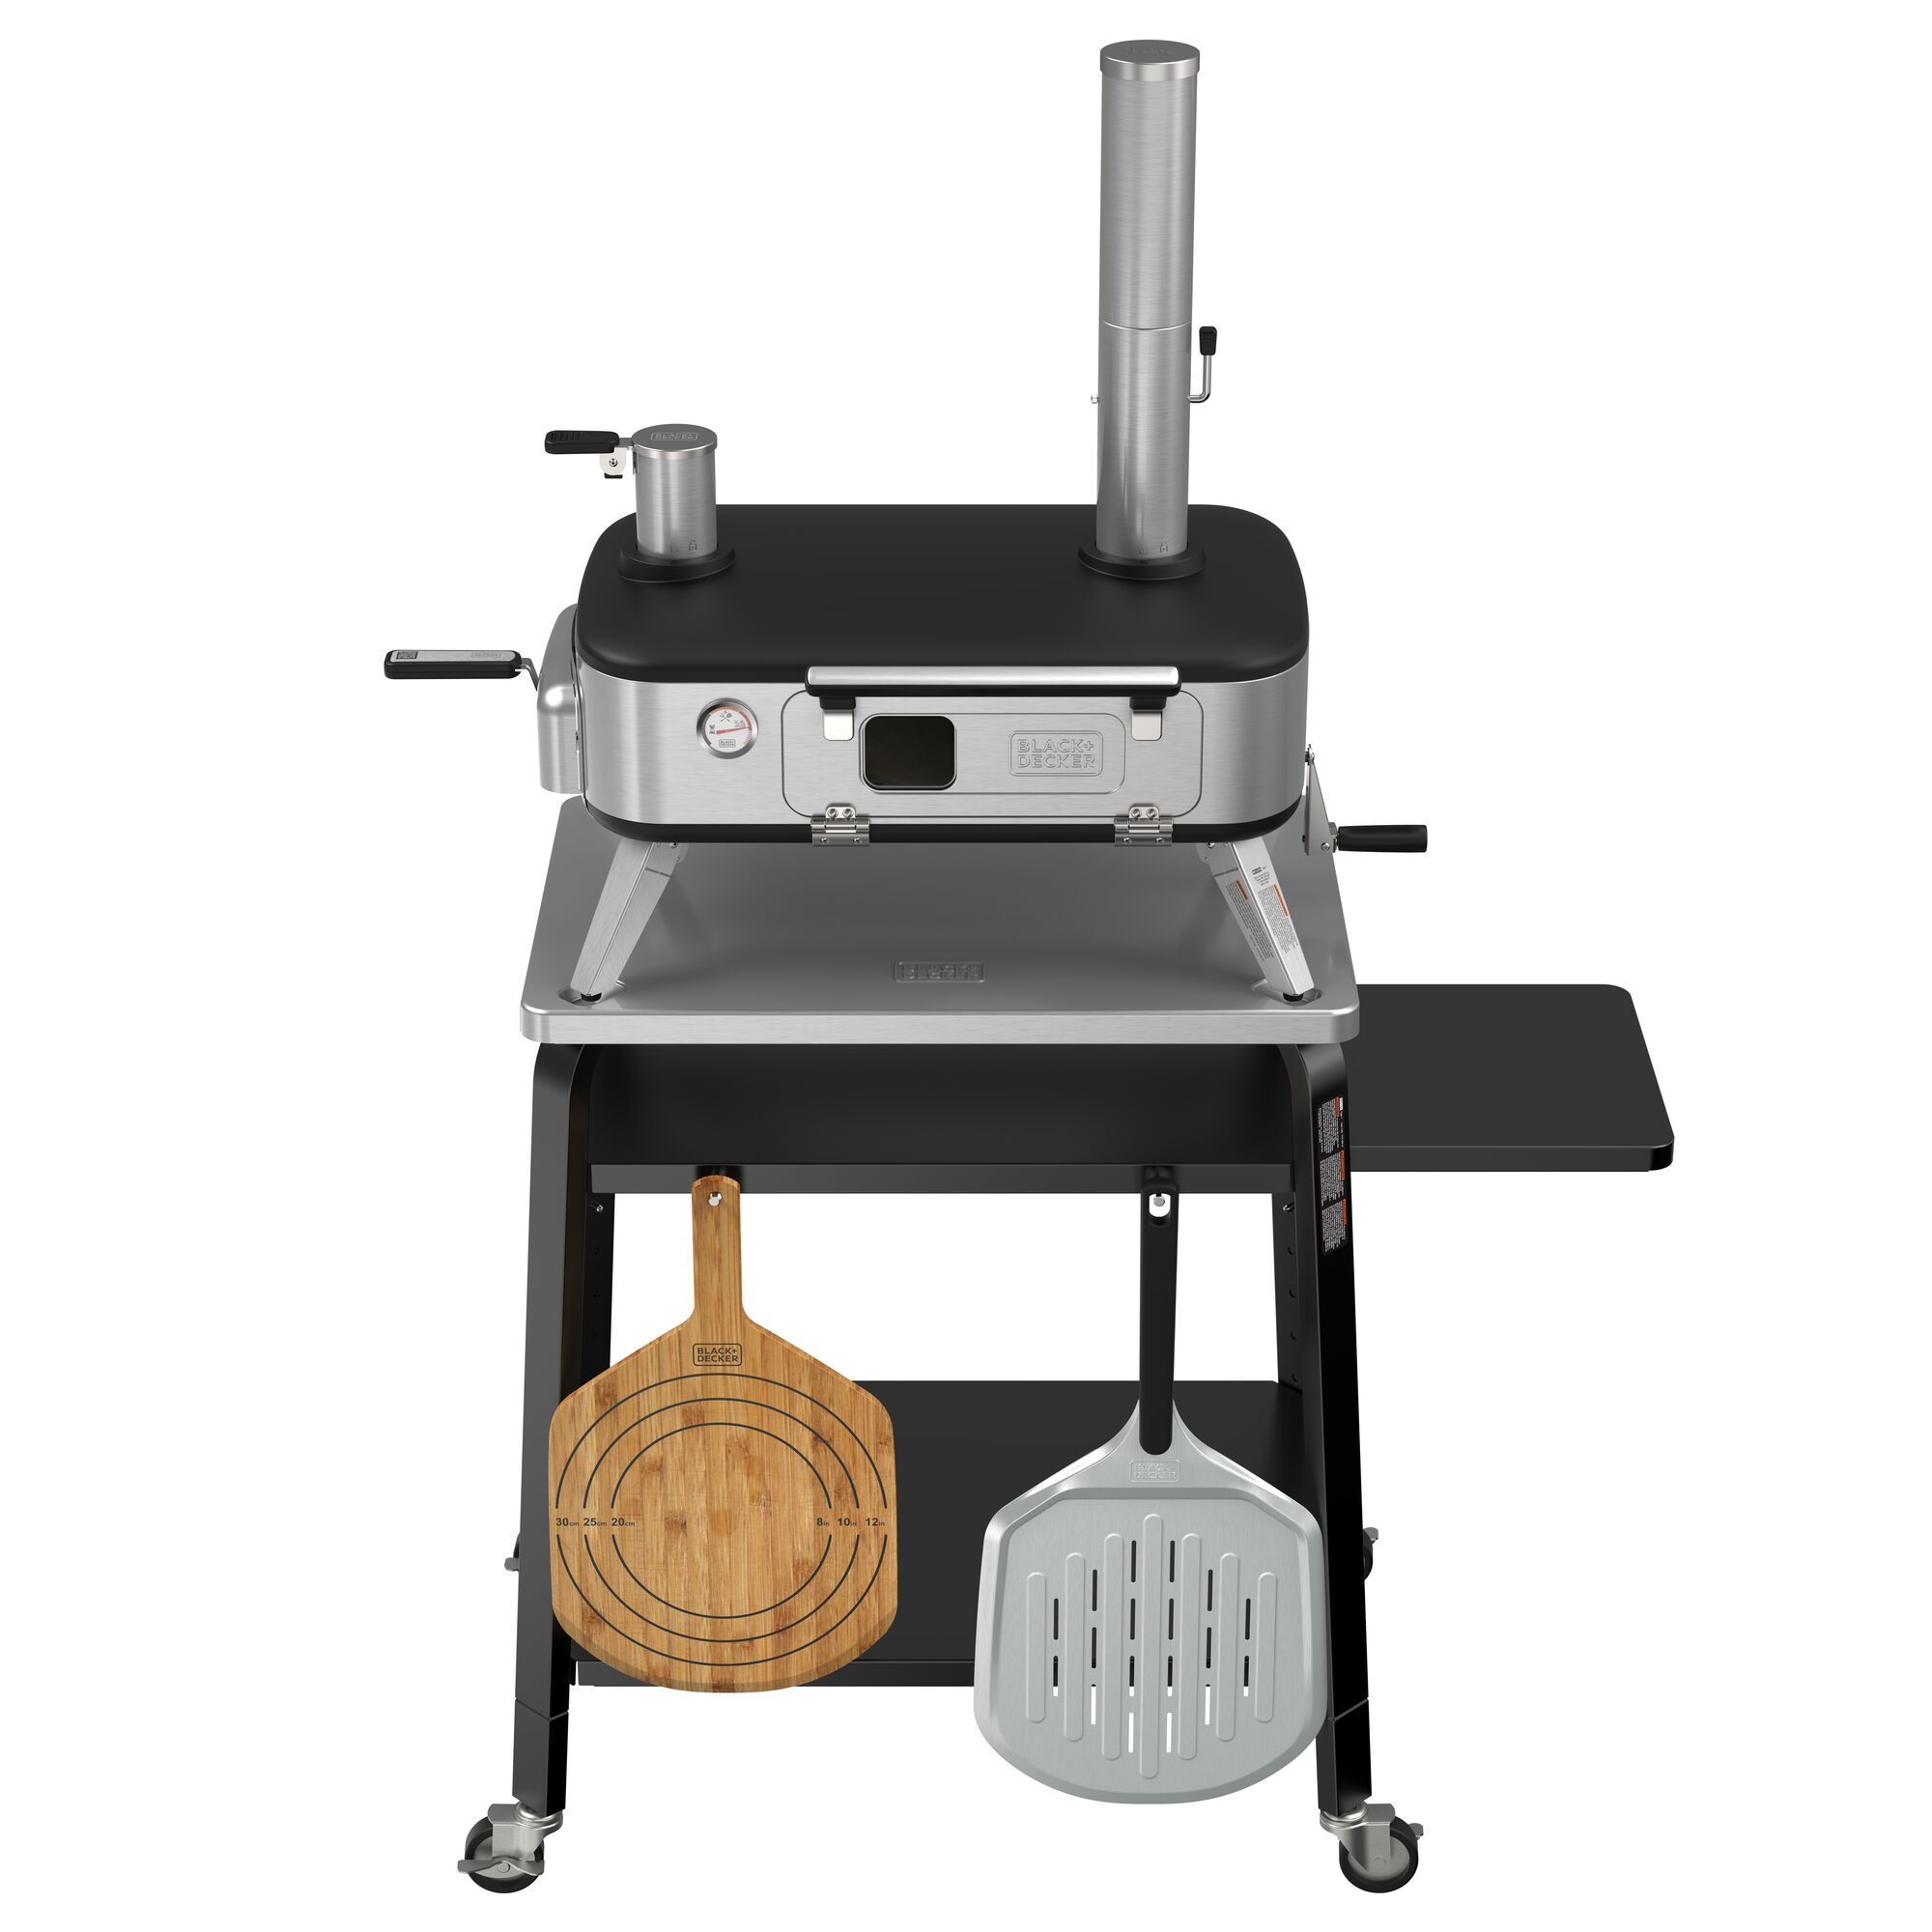 Vera ™ Pizza Oven sitting on the BLACK+DECKER pizza stand at an angle